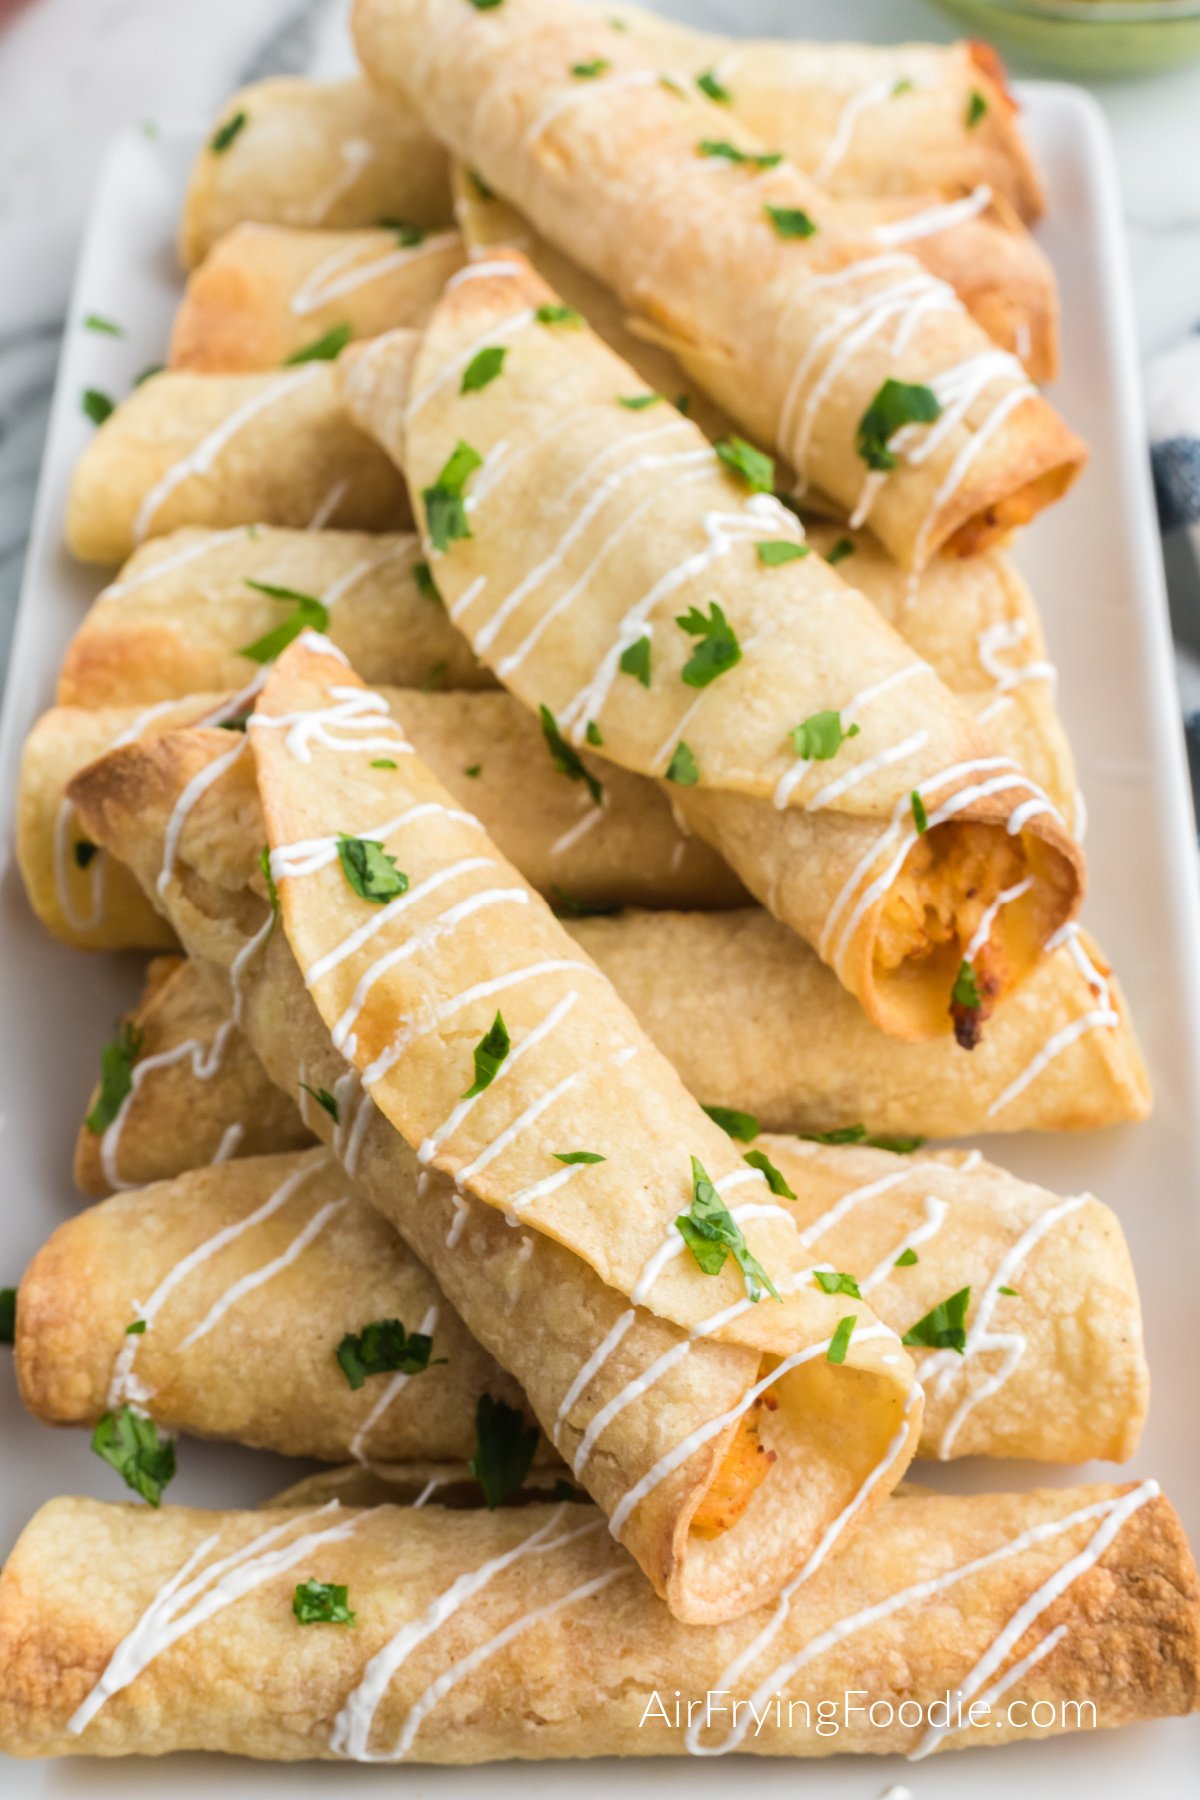 Chicken taquitos made in the air fryer, topped with sour cream and fresh cilantro.